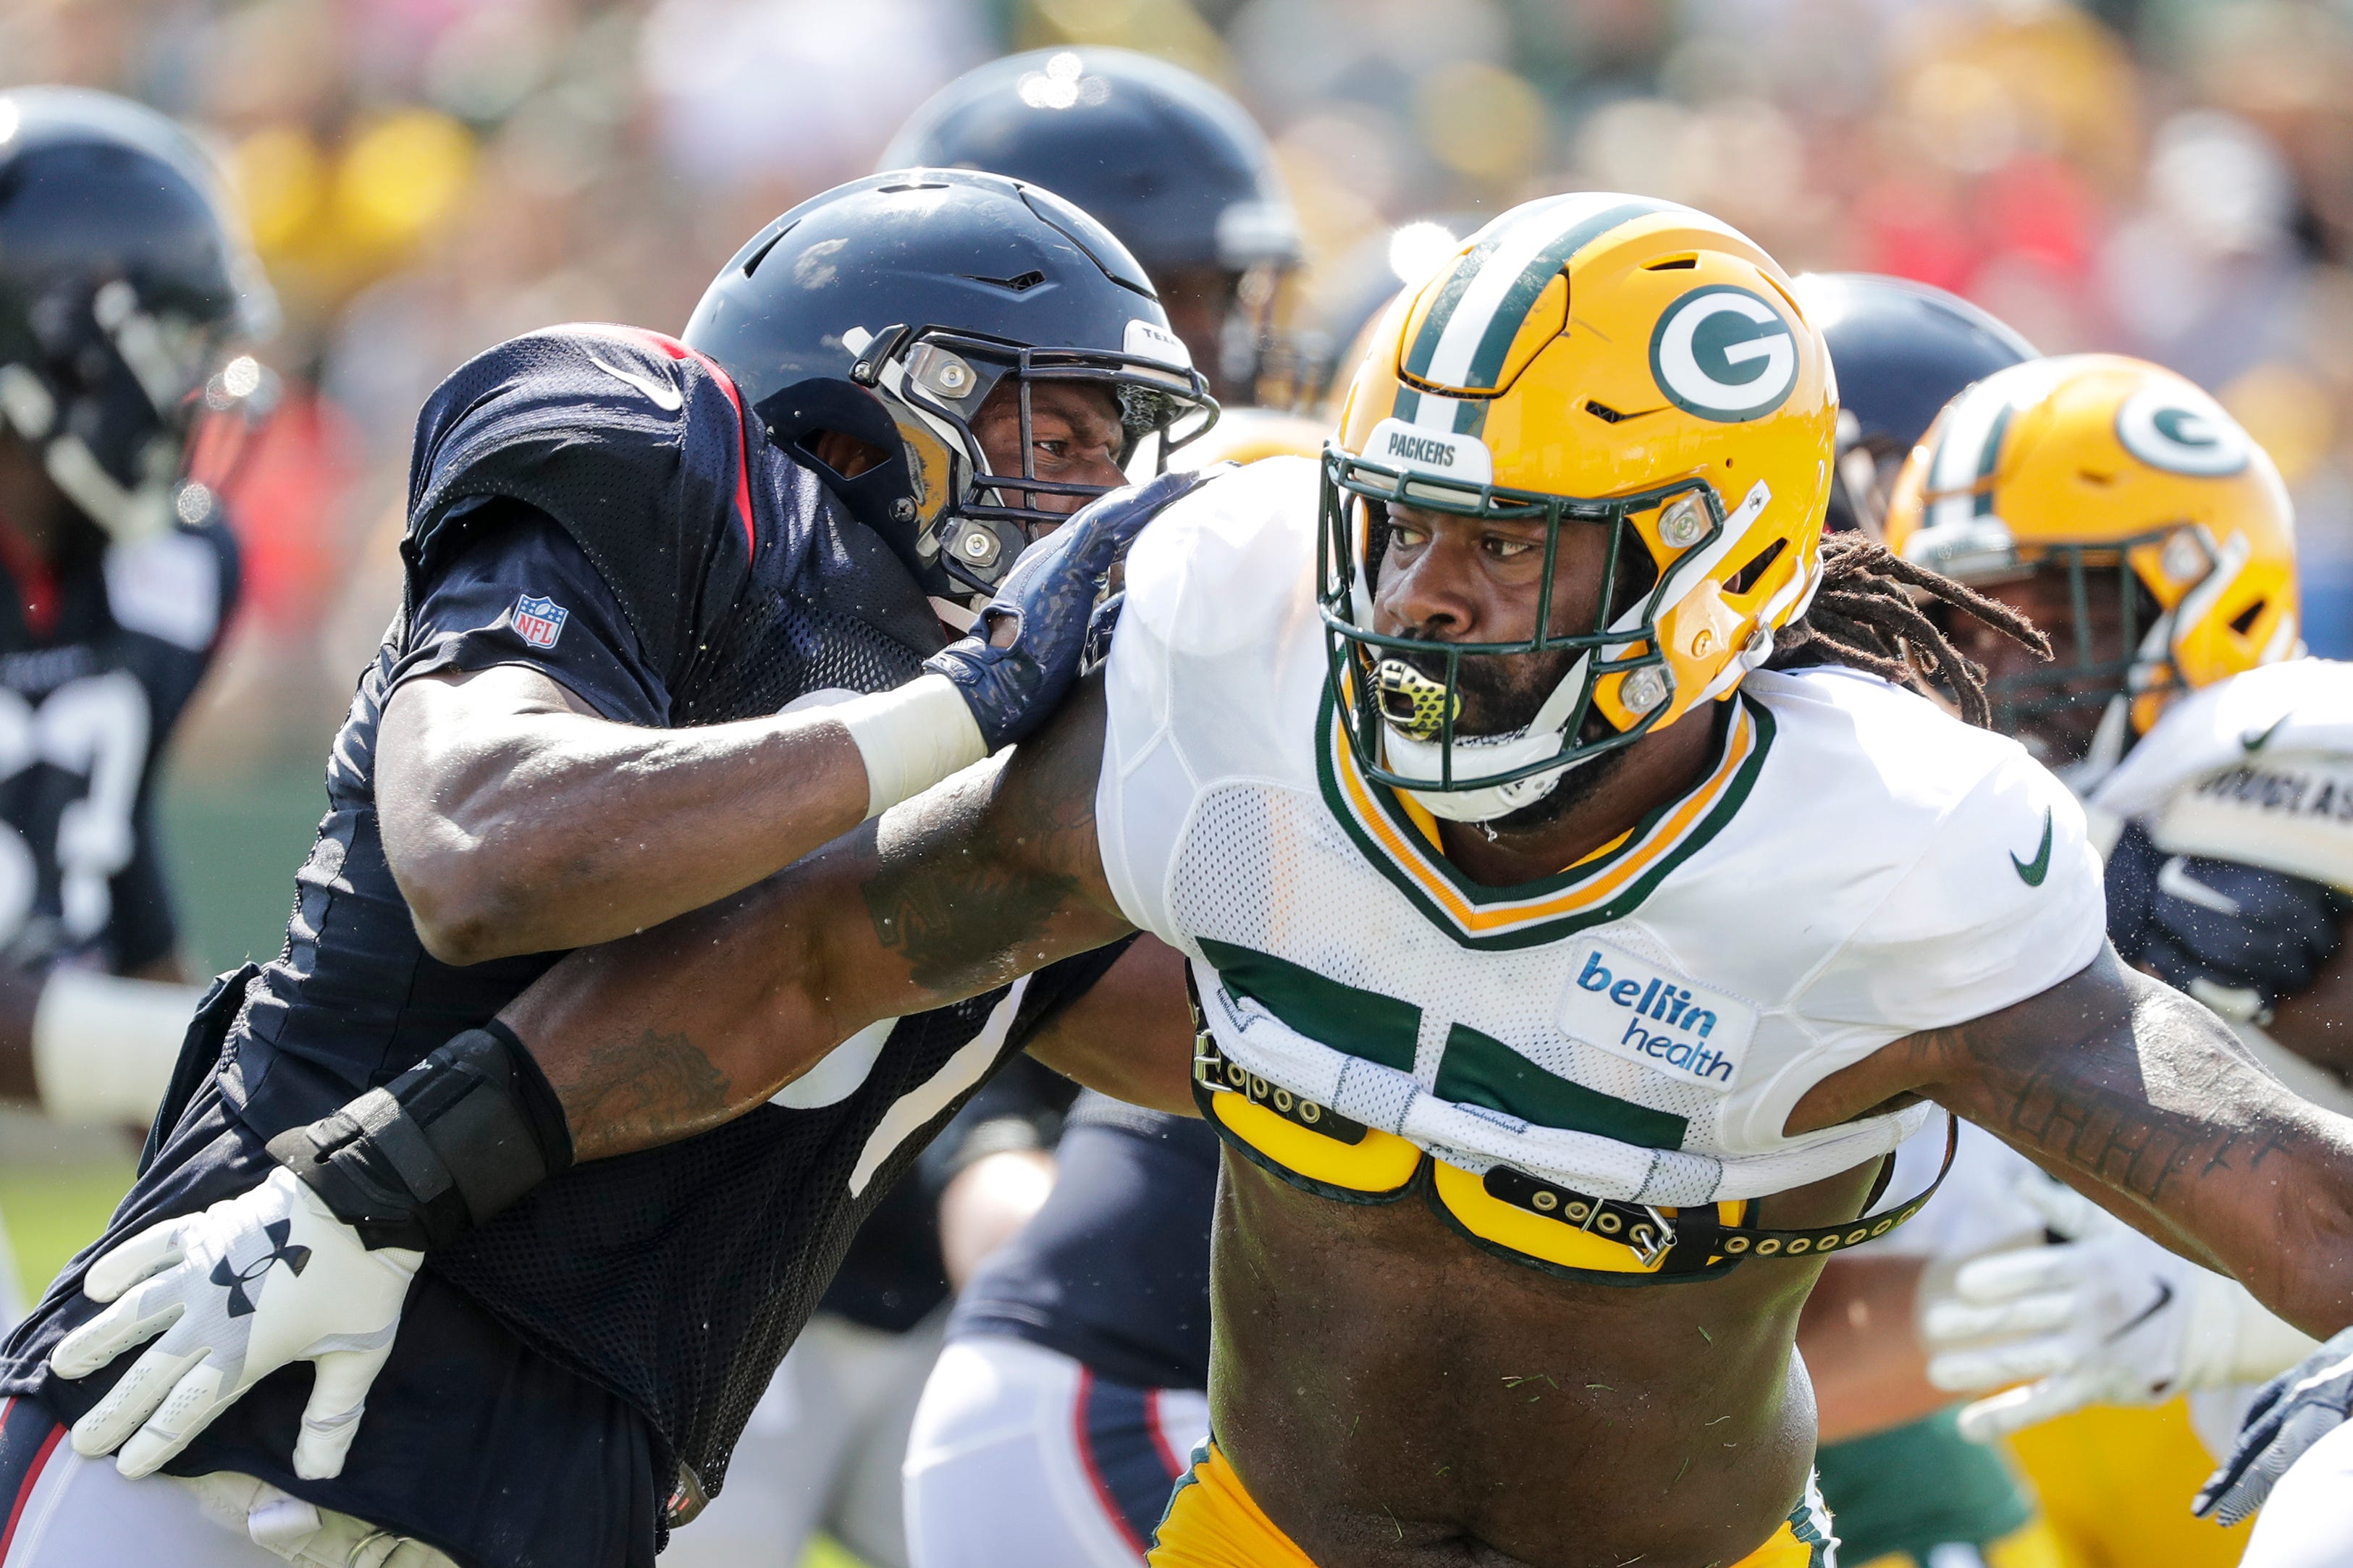 Packers linebacker Za'Darius Smith (55) makes a move past Texans tight end Darren Fells (87) during a joint training camp practice at Ray Nitchske Field Monday, August 5, 2019, in Ashwaubenon, Wis.